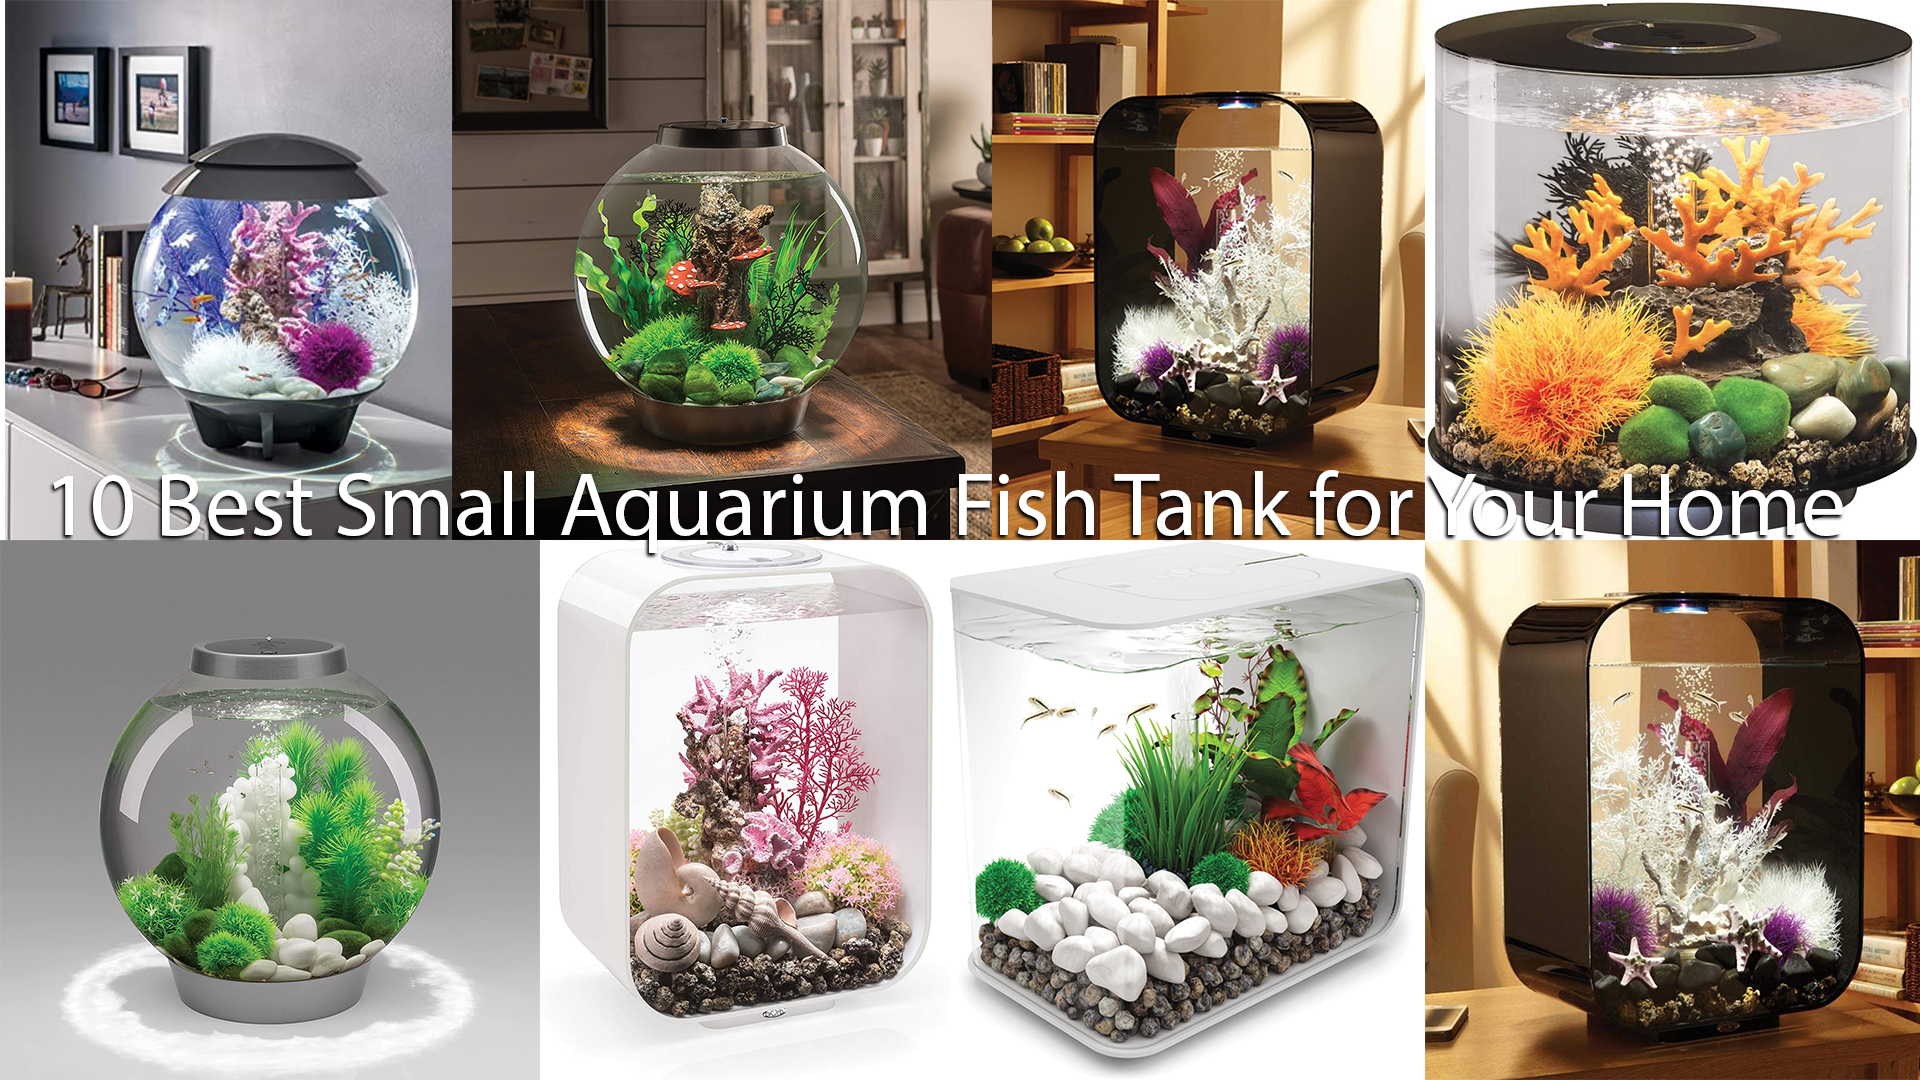 10 Best Small Aquarium Fish Tank for Your Home